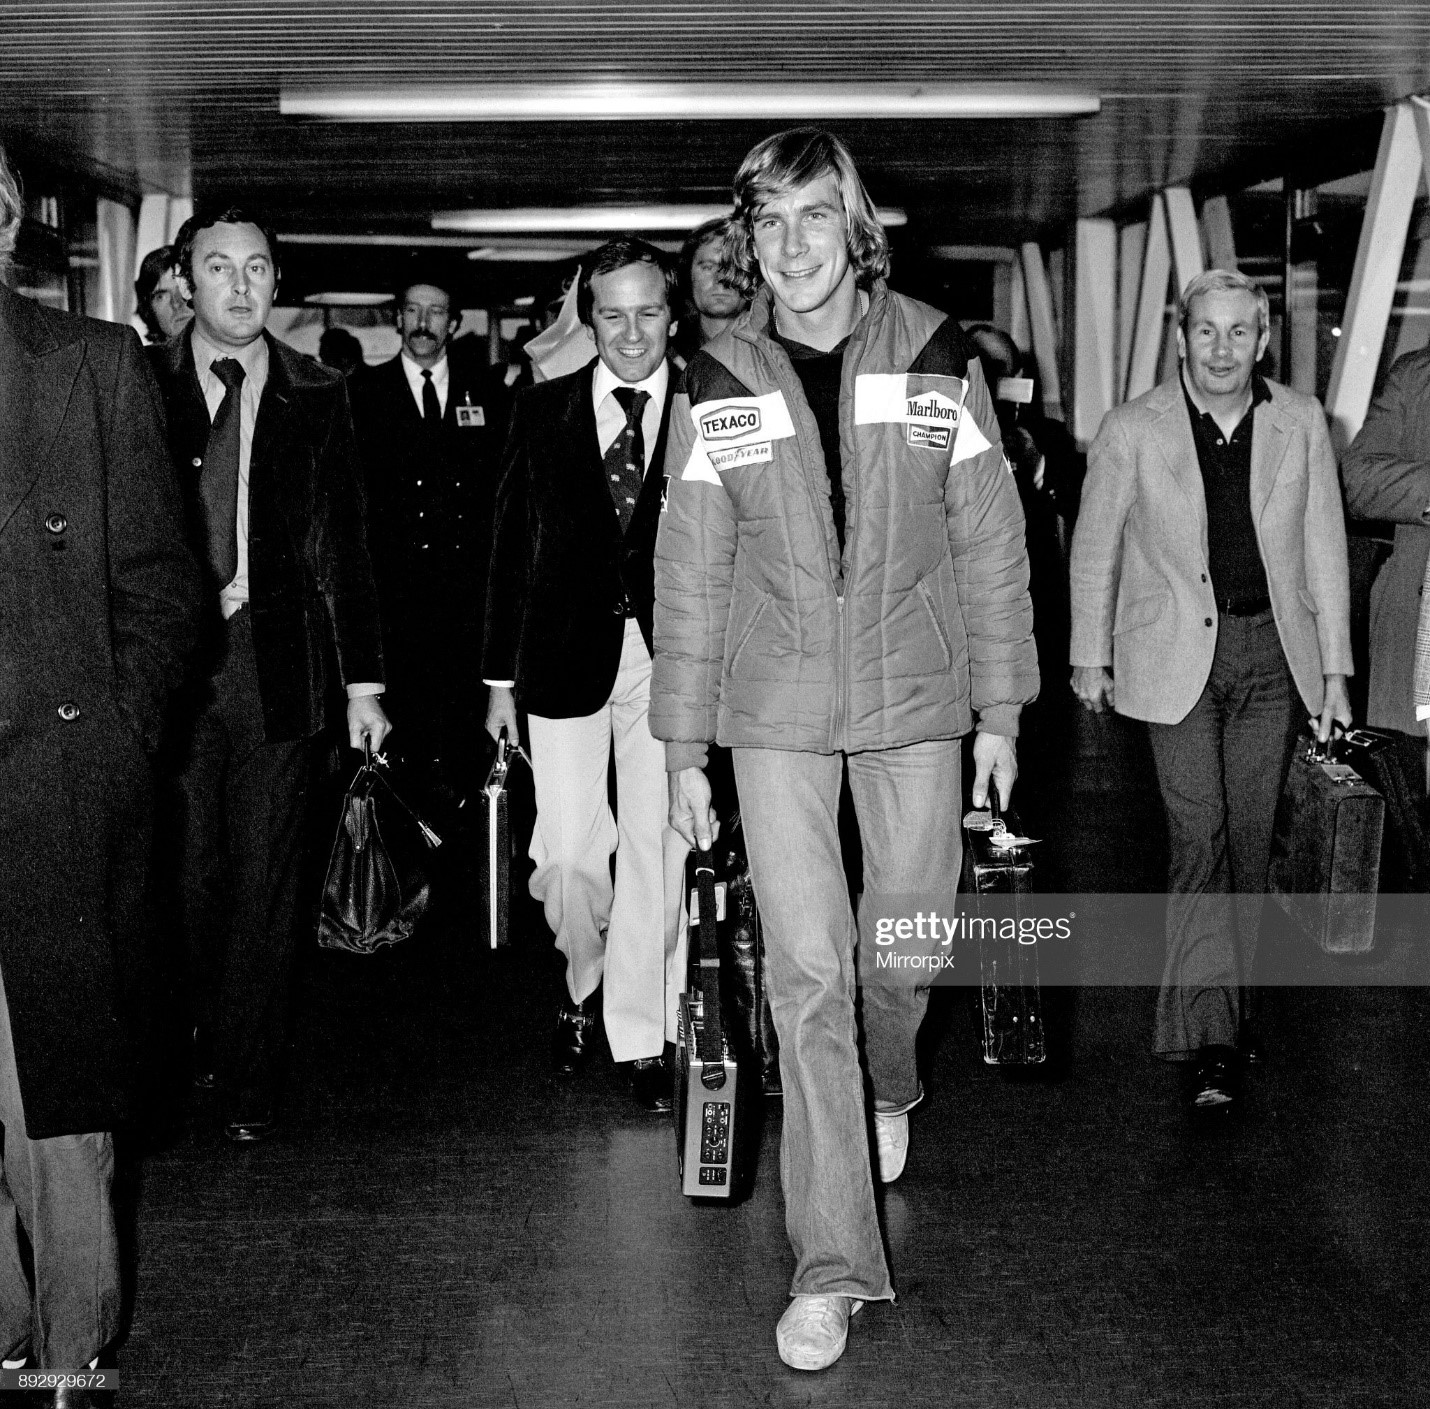 James Hunt, the new World Motor Racing Champion, received a hero's welcome when he flew into Heathrow Airport this morning from Japan. The 29-year-old McLaren Formula One driver was greeted by most of his family and girlfriend Jane Birbeck. Picture, taken 26th October1976, shows James Hunt walking through to the arrival lounge and press conference.